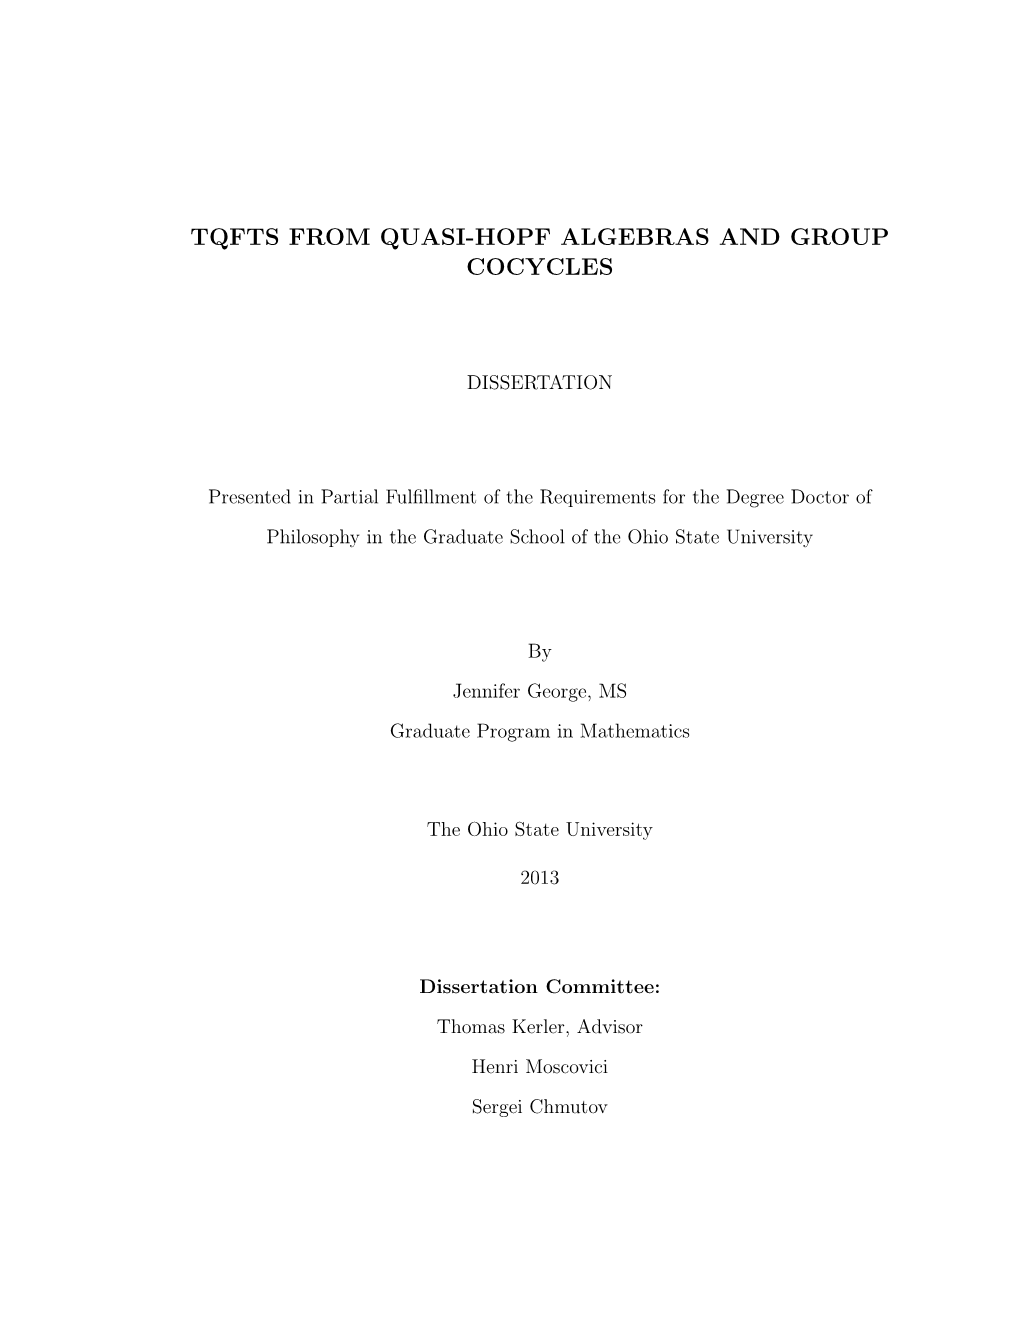 Tqfts from Quasi-Hopf Algebras and Group Cocycles